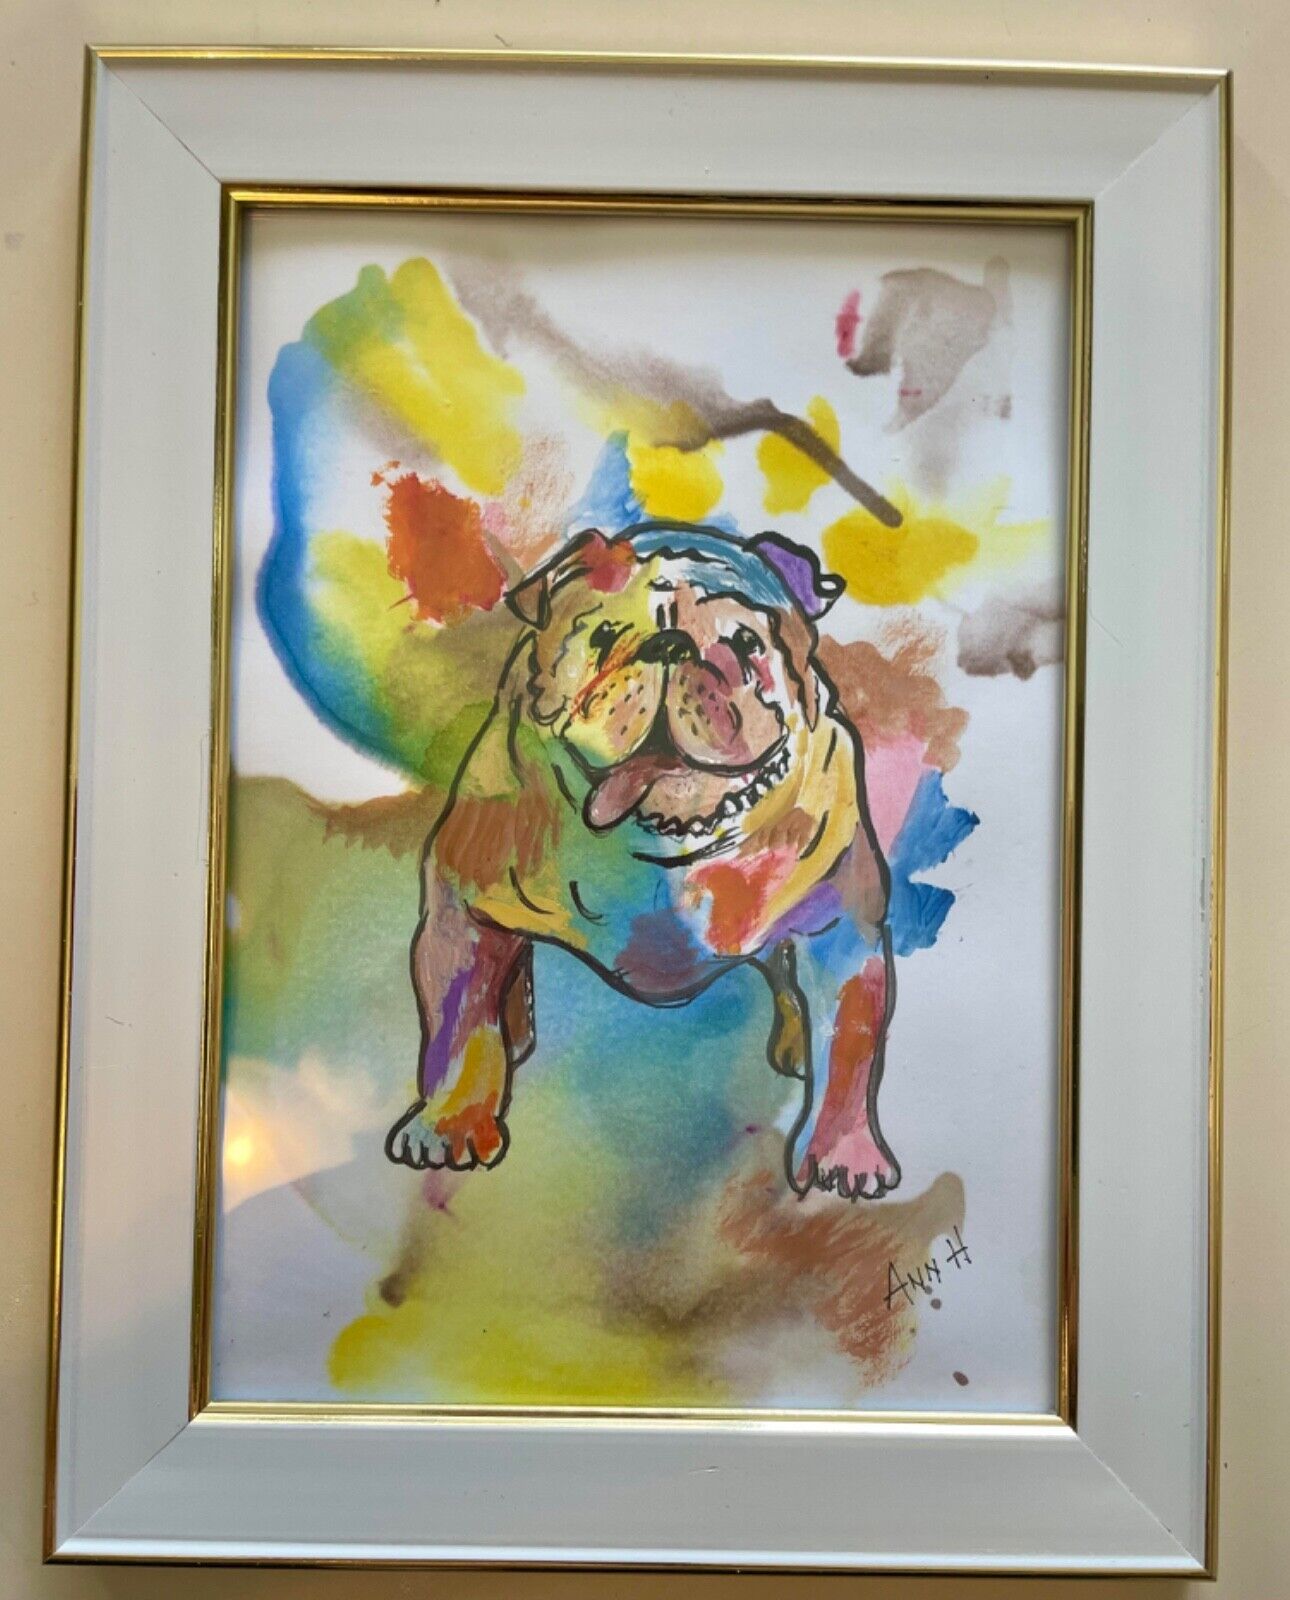 English Bulldog in alcohol Ink and acrylic in 5x7 frame / Ann